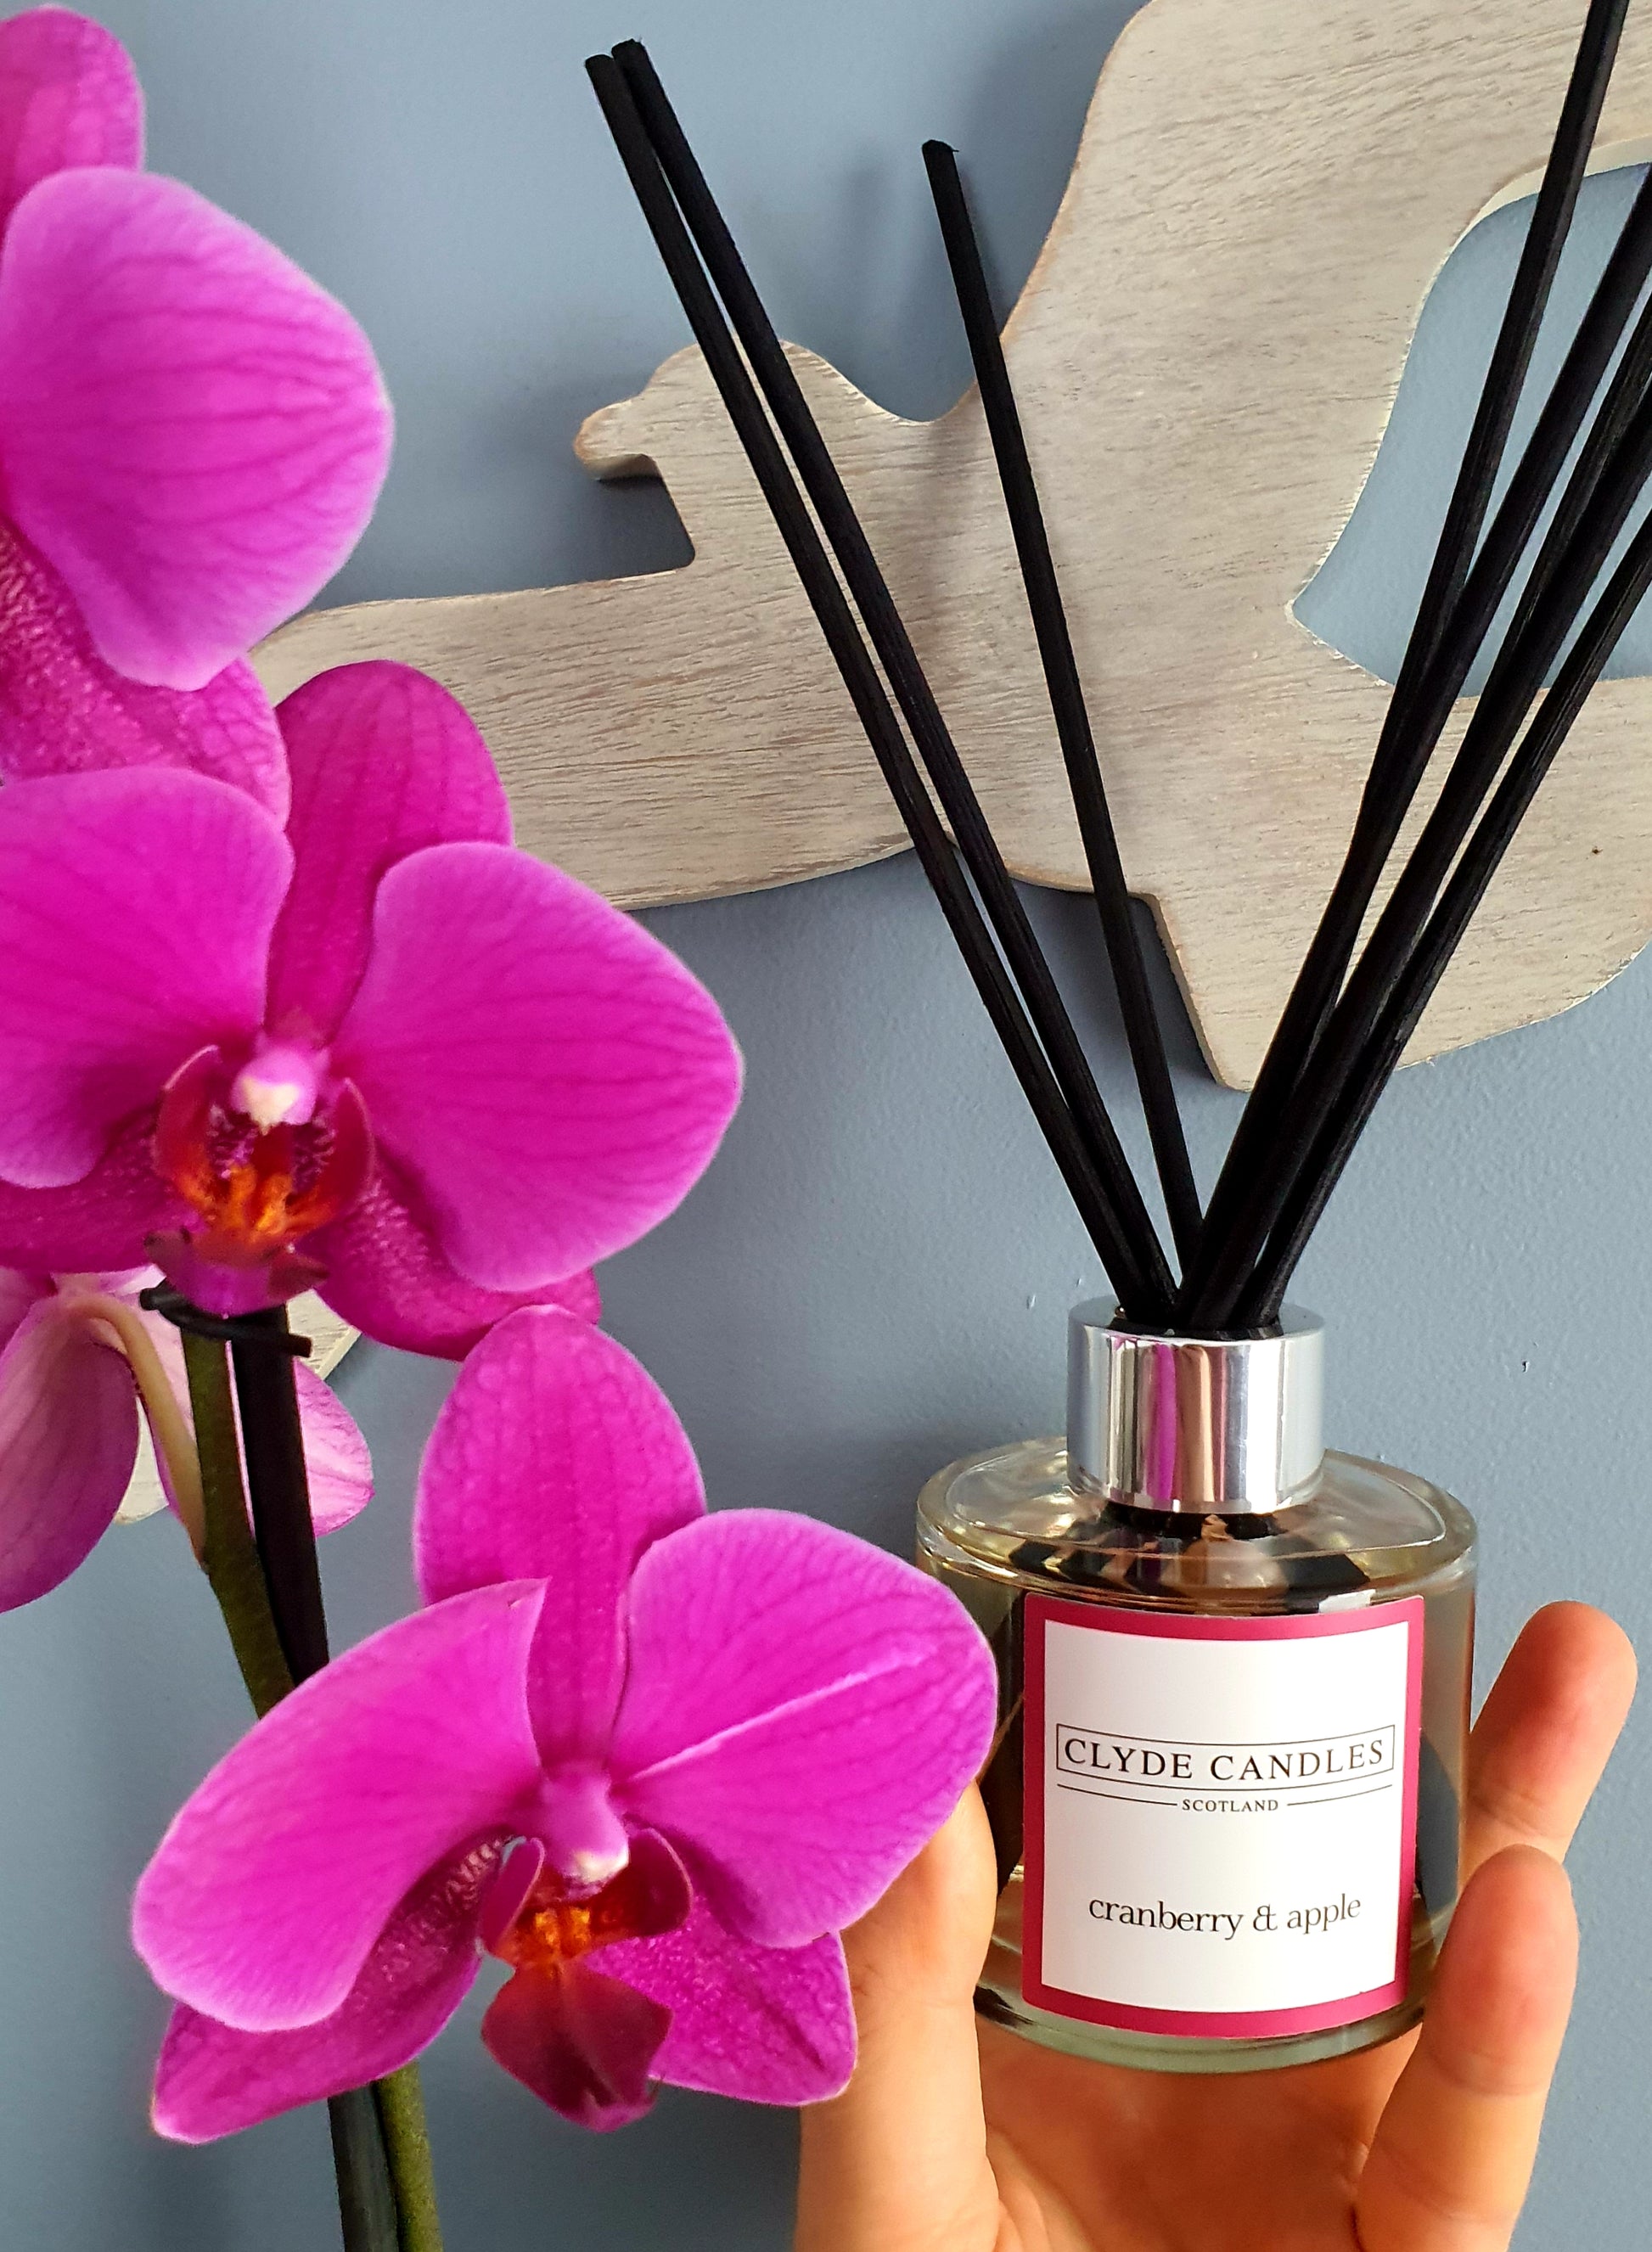 Cranberry & Apple Reed Diffuser - Clyde Candles, Luxury Diffuser Oil with a Set of 7 Fibre Sticks, 100ml, Best Aroma Scent for Home, Kitchen, Living Room, Bathroom. Fragrance Diffusers set with sticks